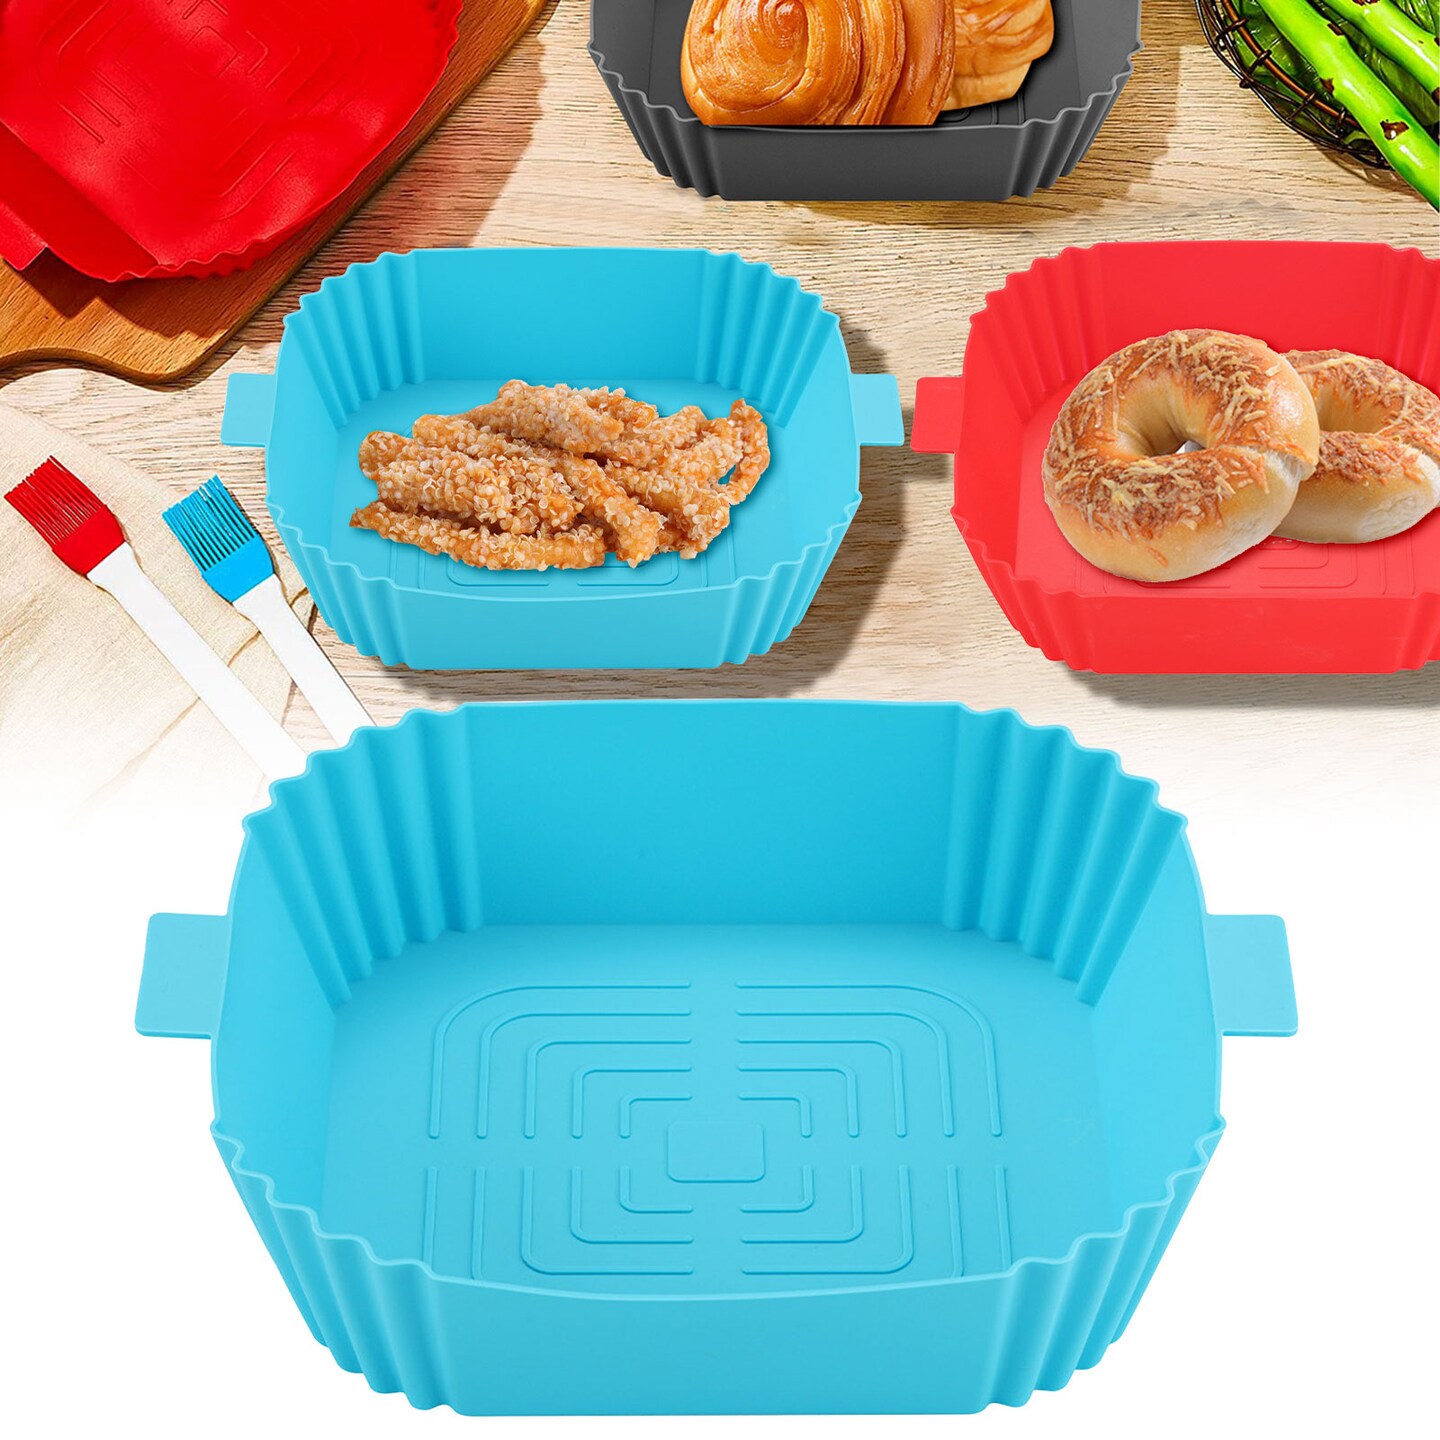 Air Fryer Silicone Pot Basket Liners Non Stick